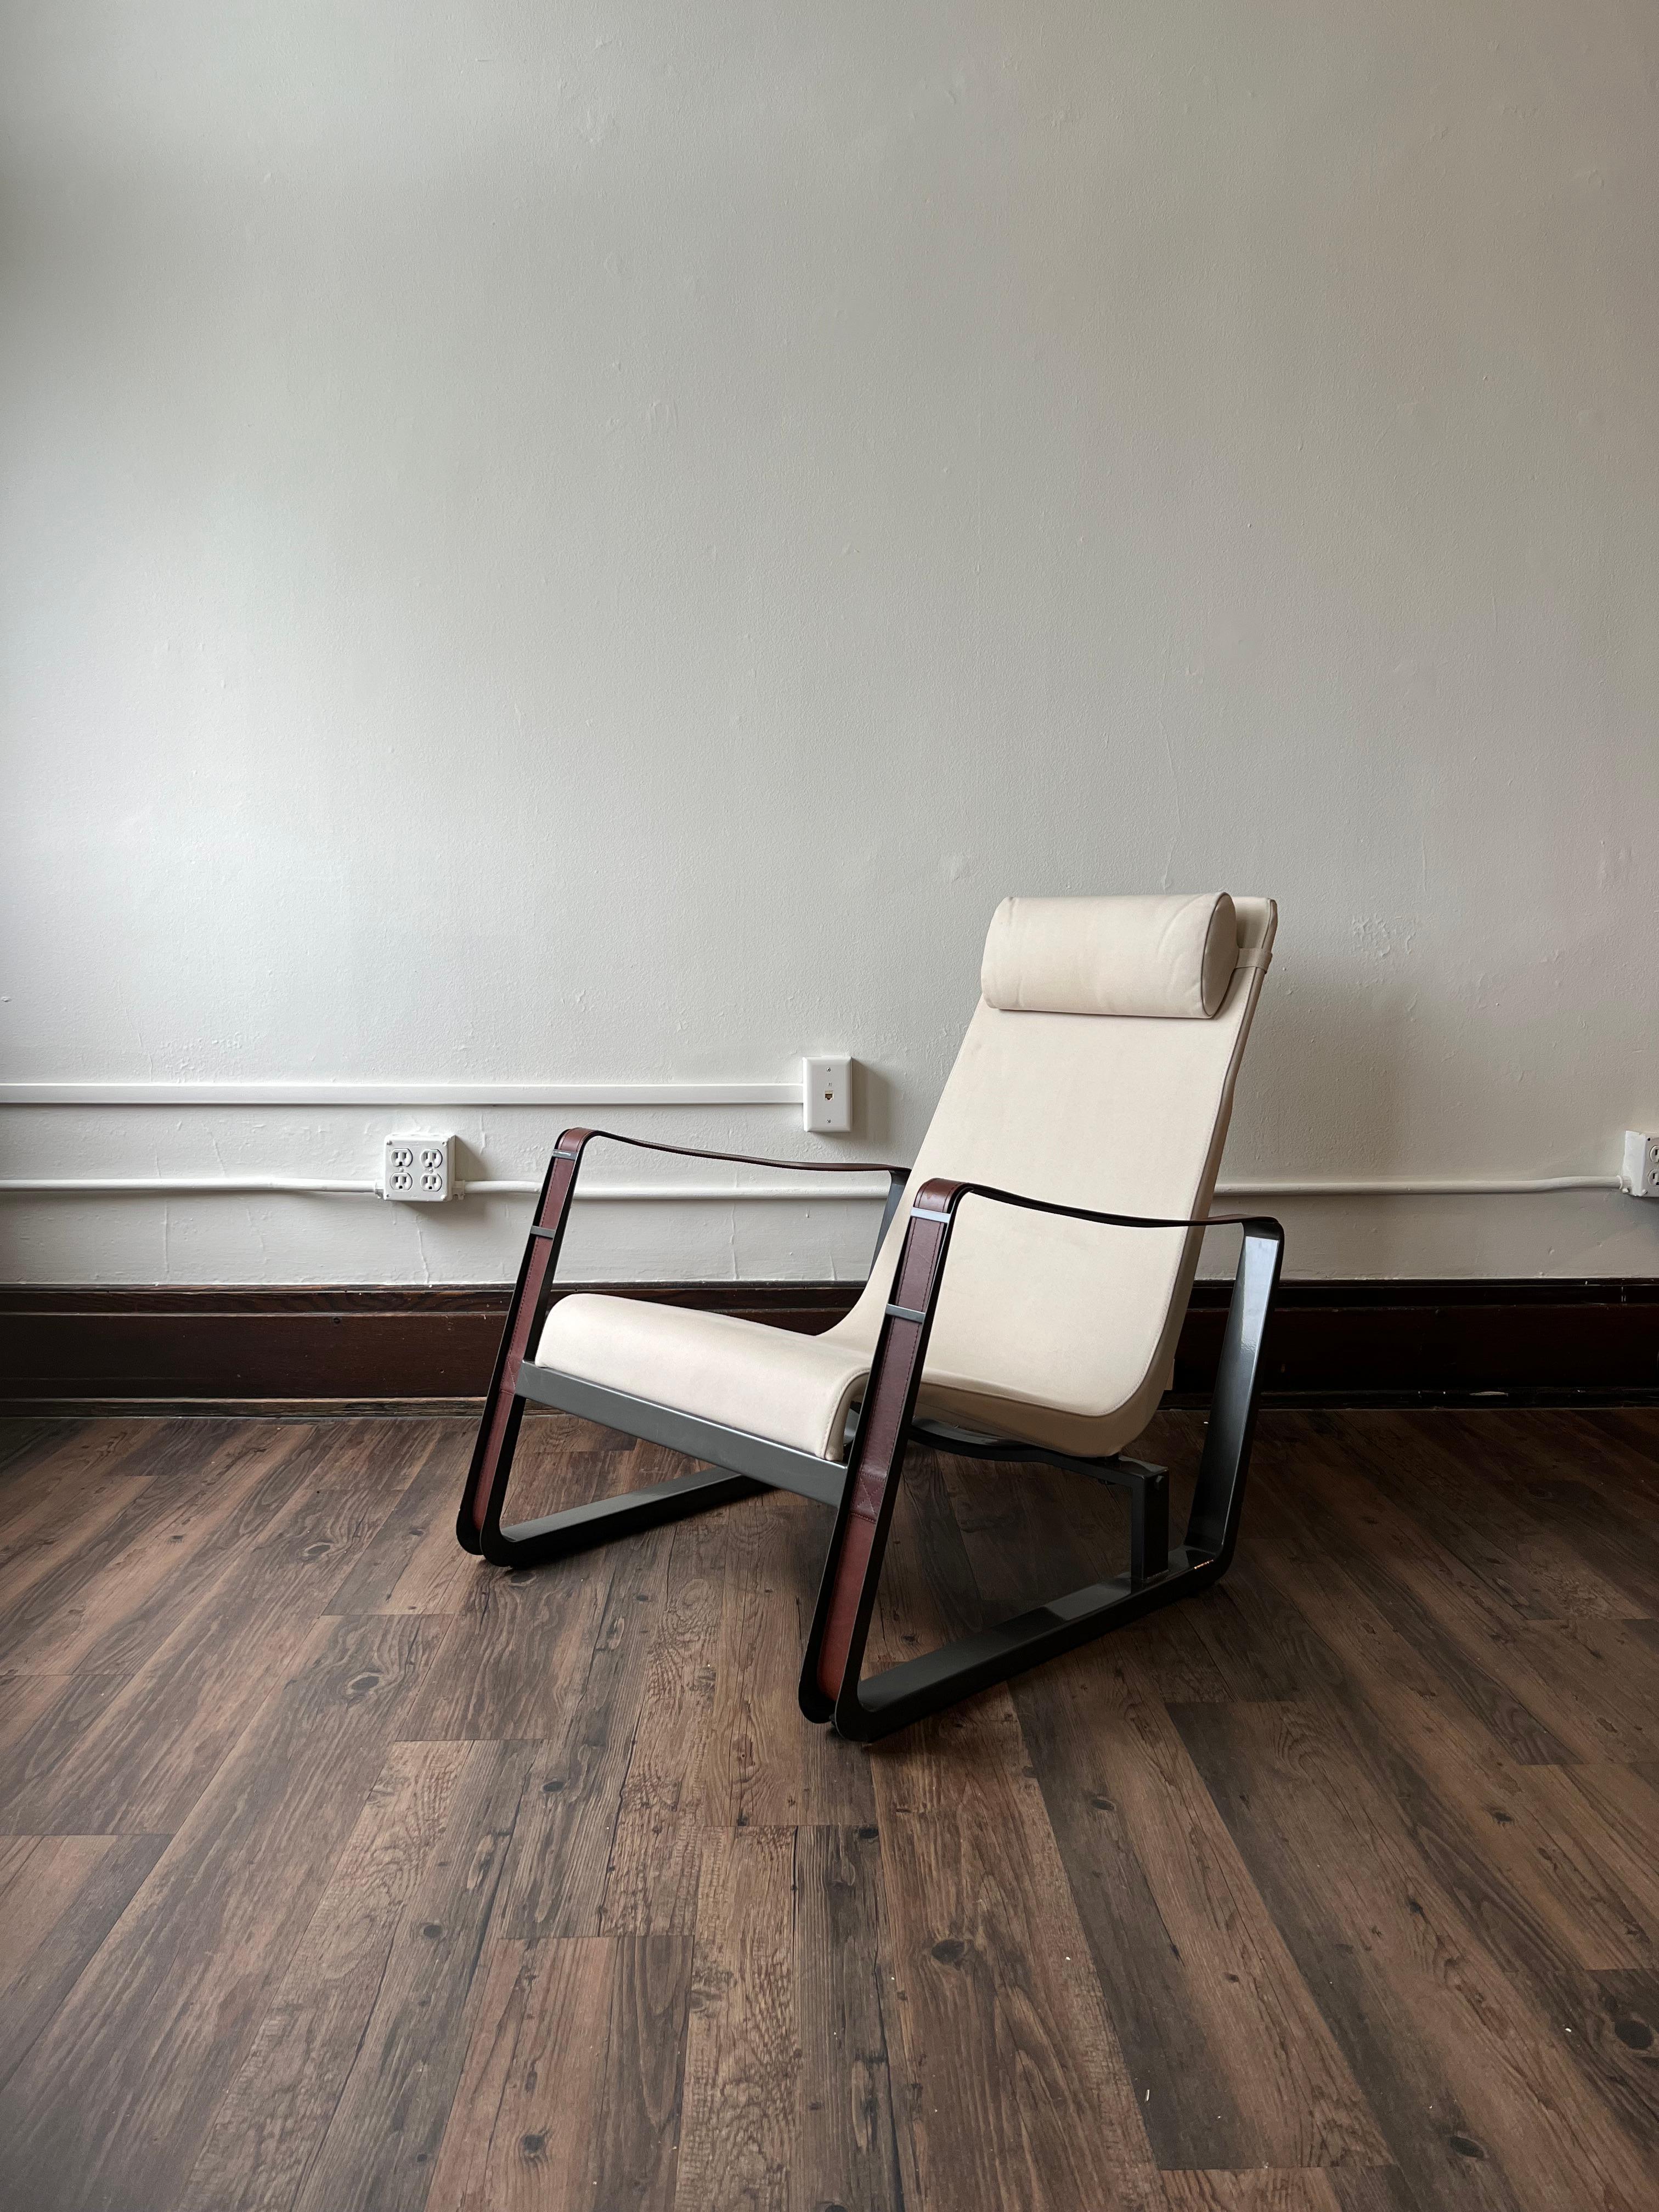 The Cité lounge chair is one of Prouvé's earlier furniture designs and it fits perfectly in the modern home where Prouvé himself used it. Jean Prouvé was a 